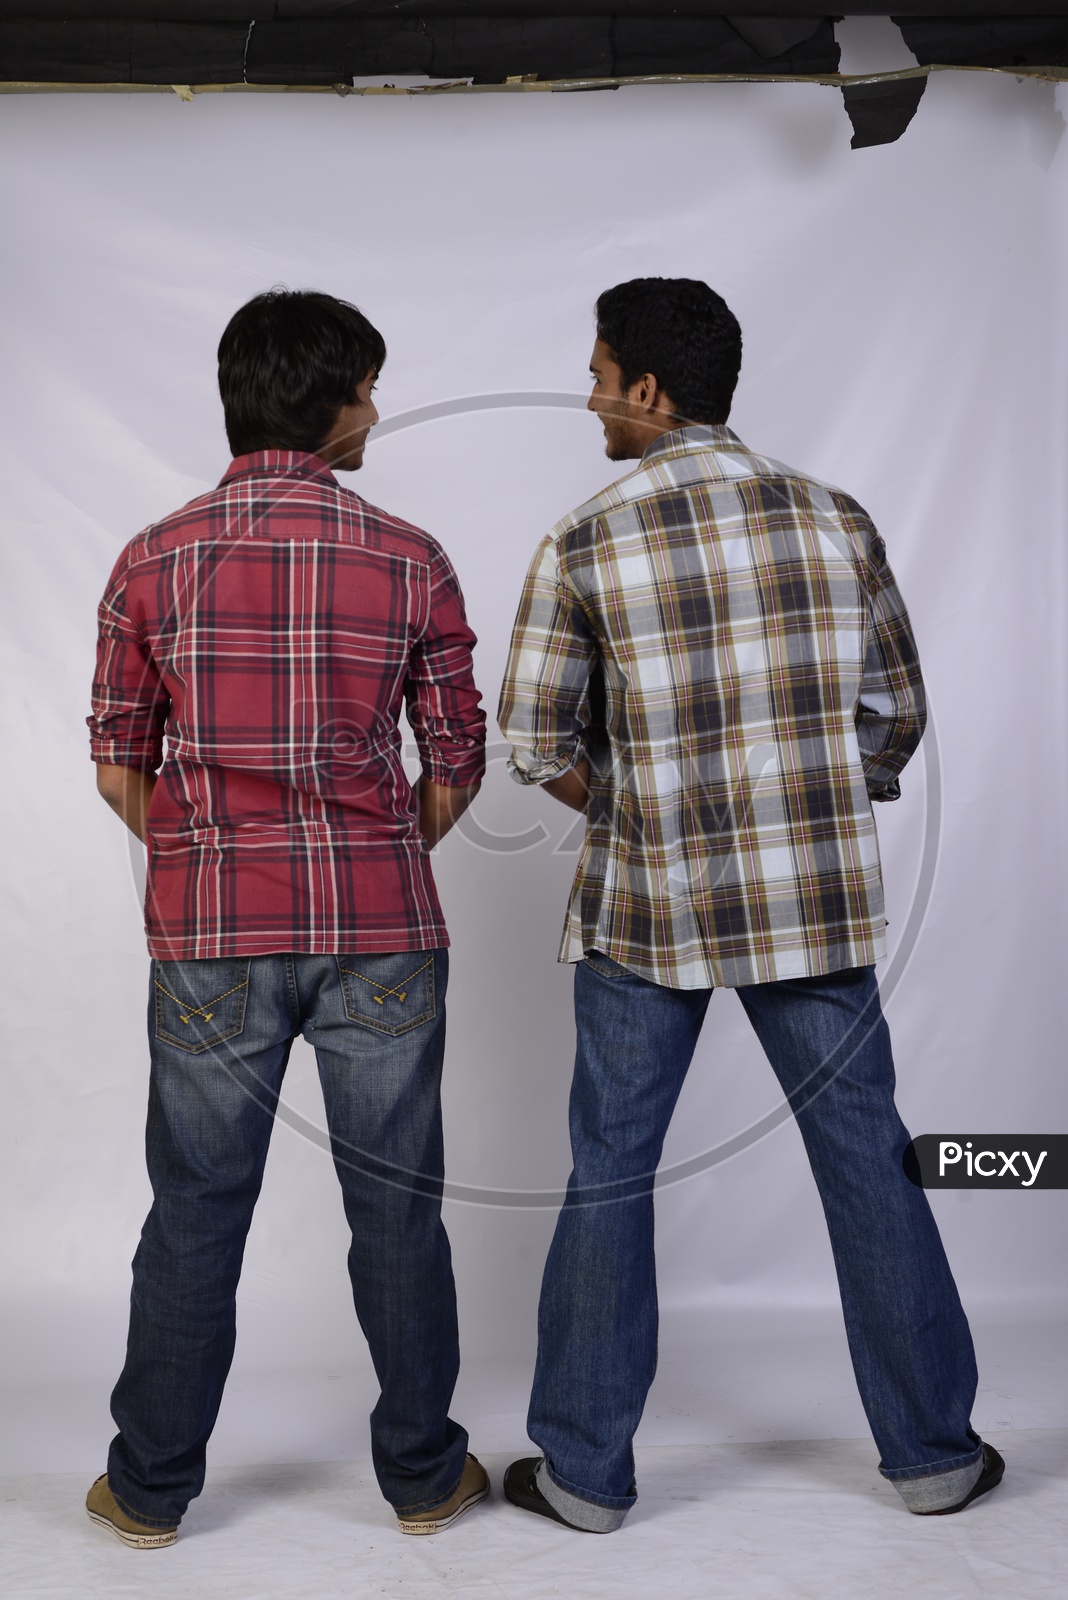 A Couple Of Boys or Friends Passing Urine   And Chatting  On an Isolated  White Background